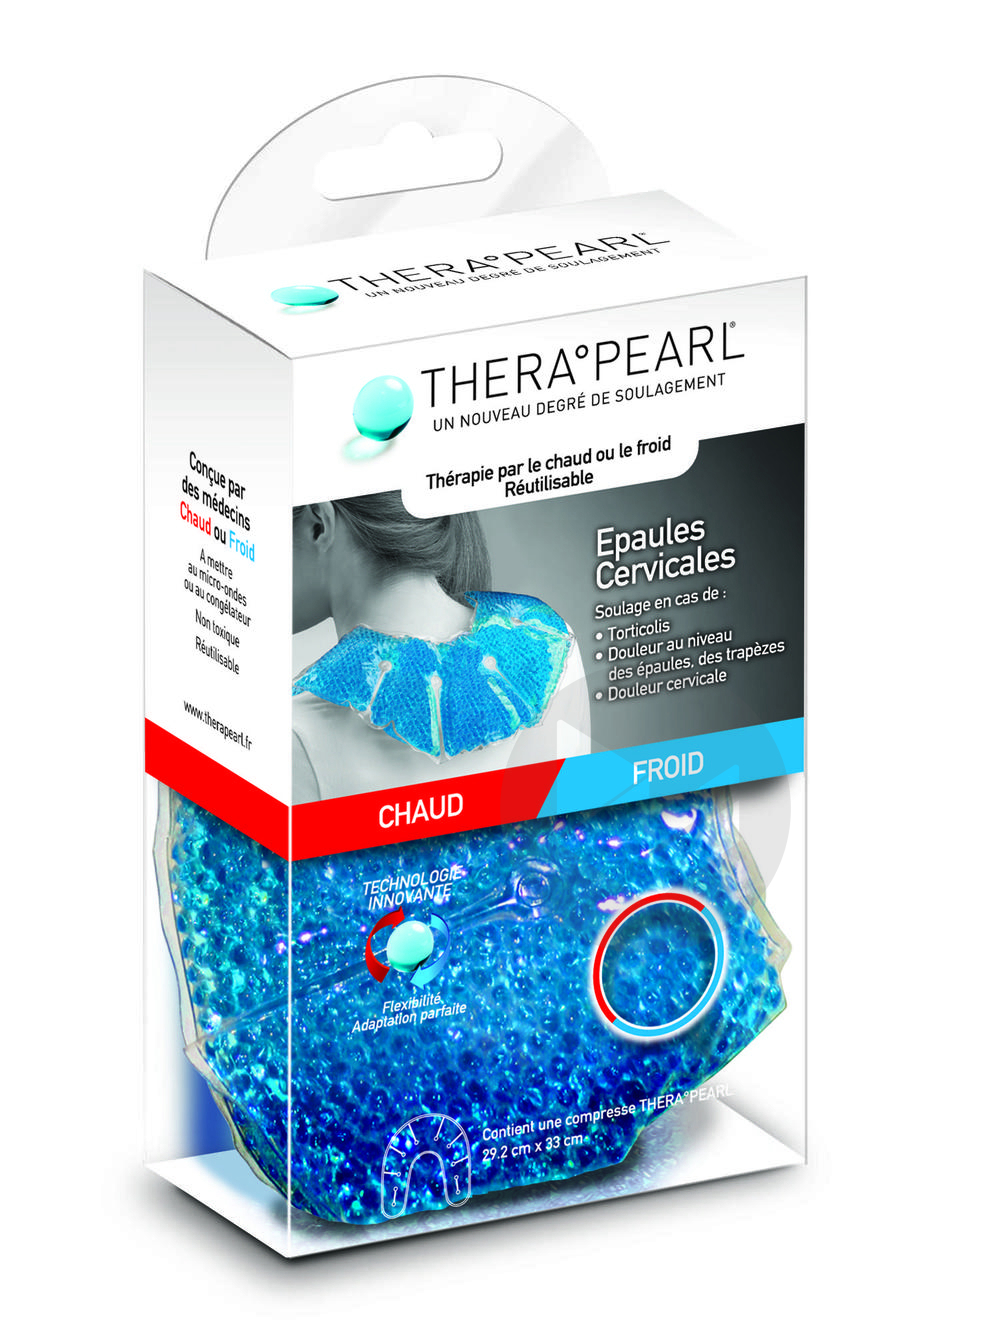 Therapearl Epaules /cervicales